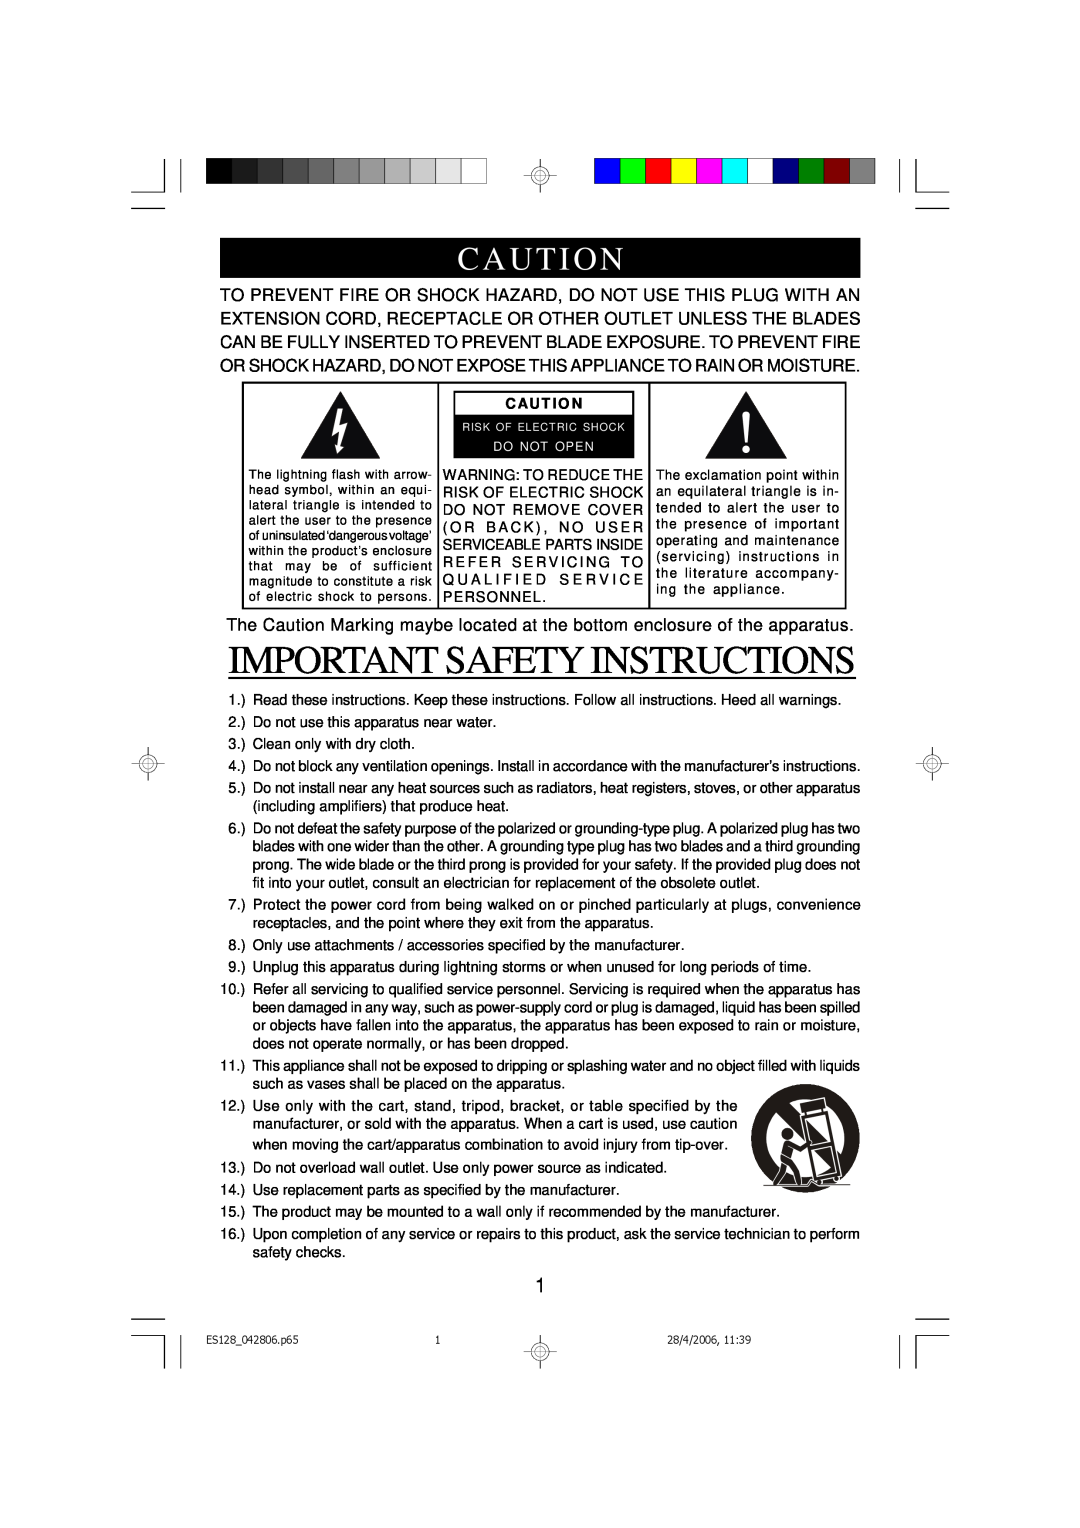 Emerson ES128 owner manual Important Safety Instructions, Caut I On, Caut I O N 